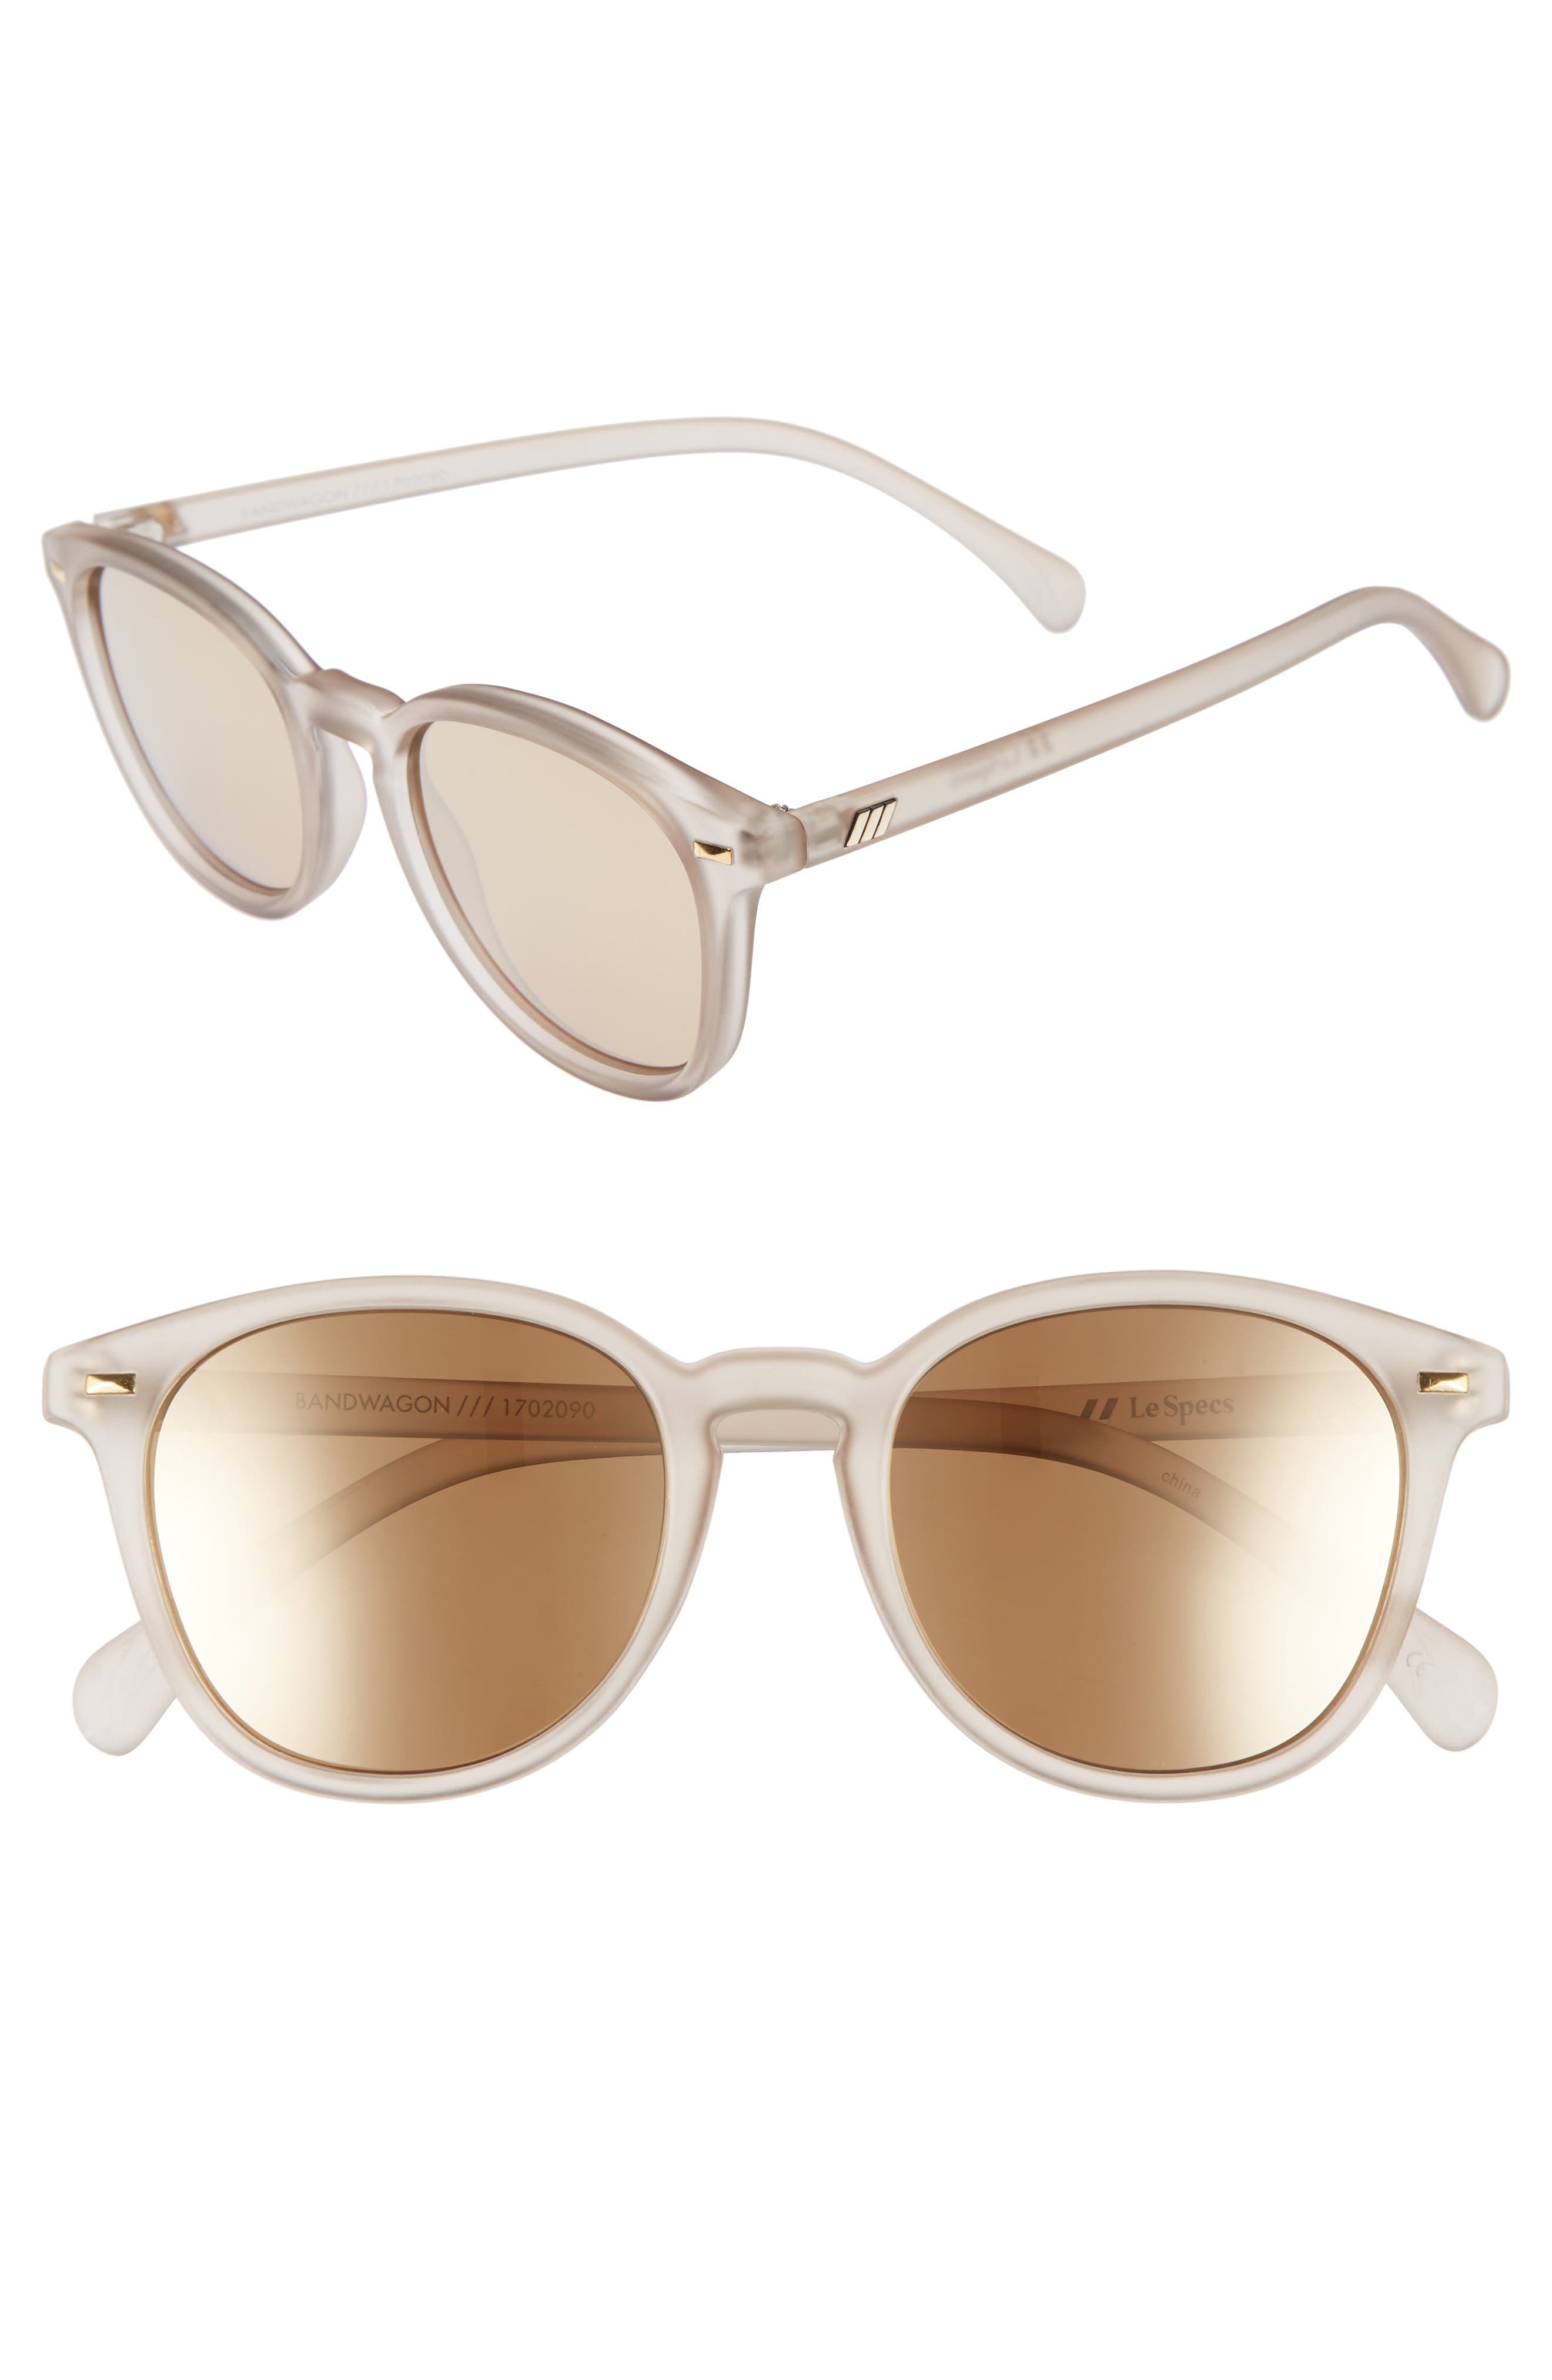 Le Specs Bandwagon 51mm Sunglasses in Matte Stone at Nordstrom